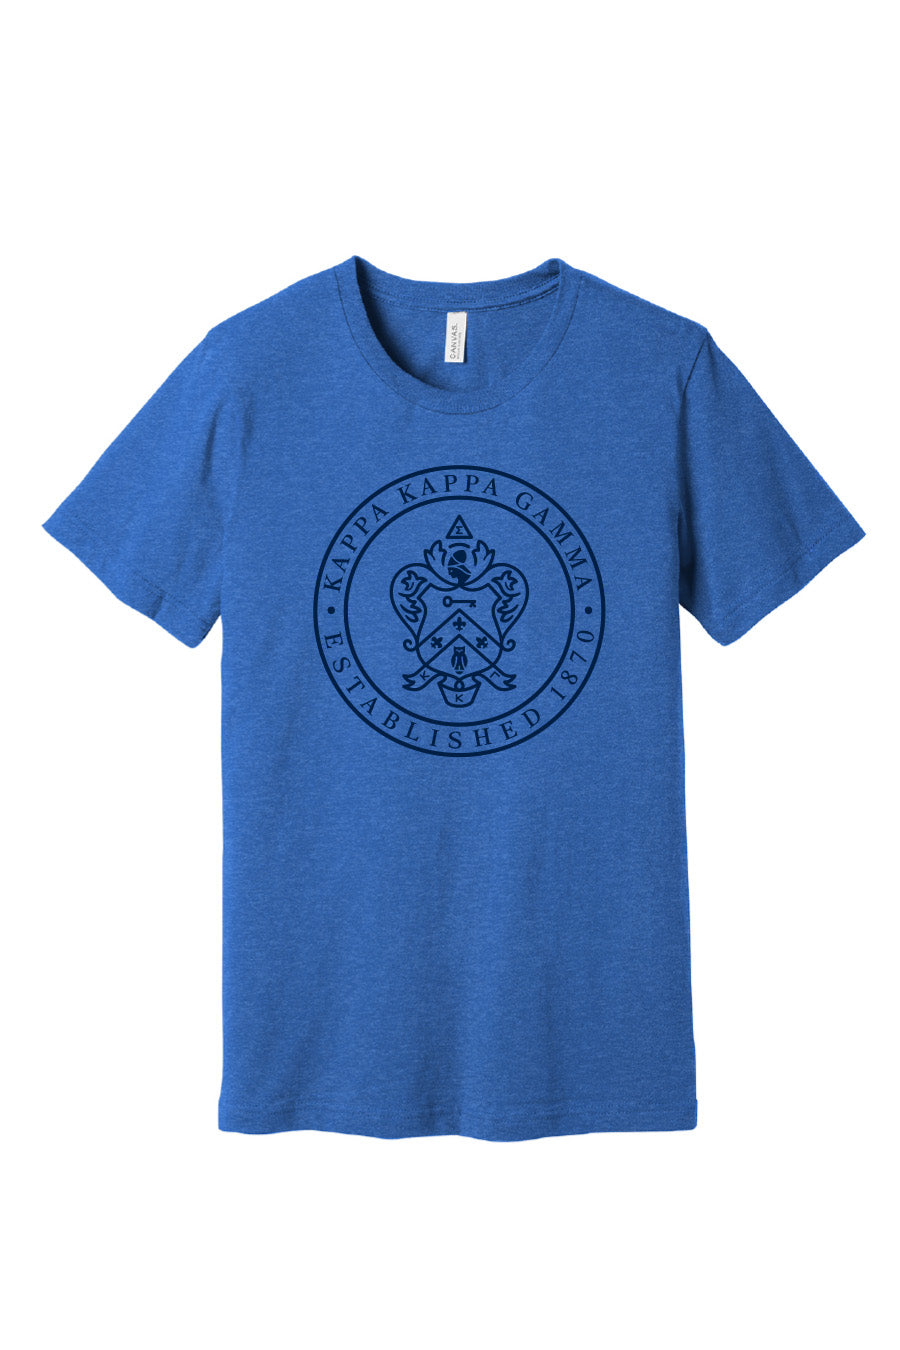 Stamp of Approval Royal Tee